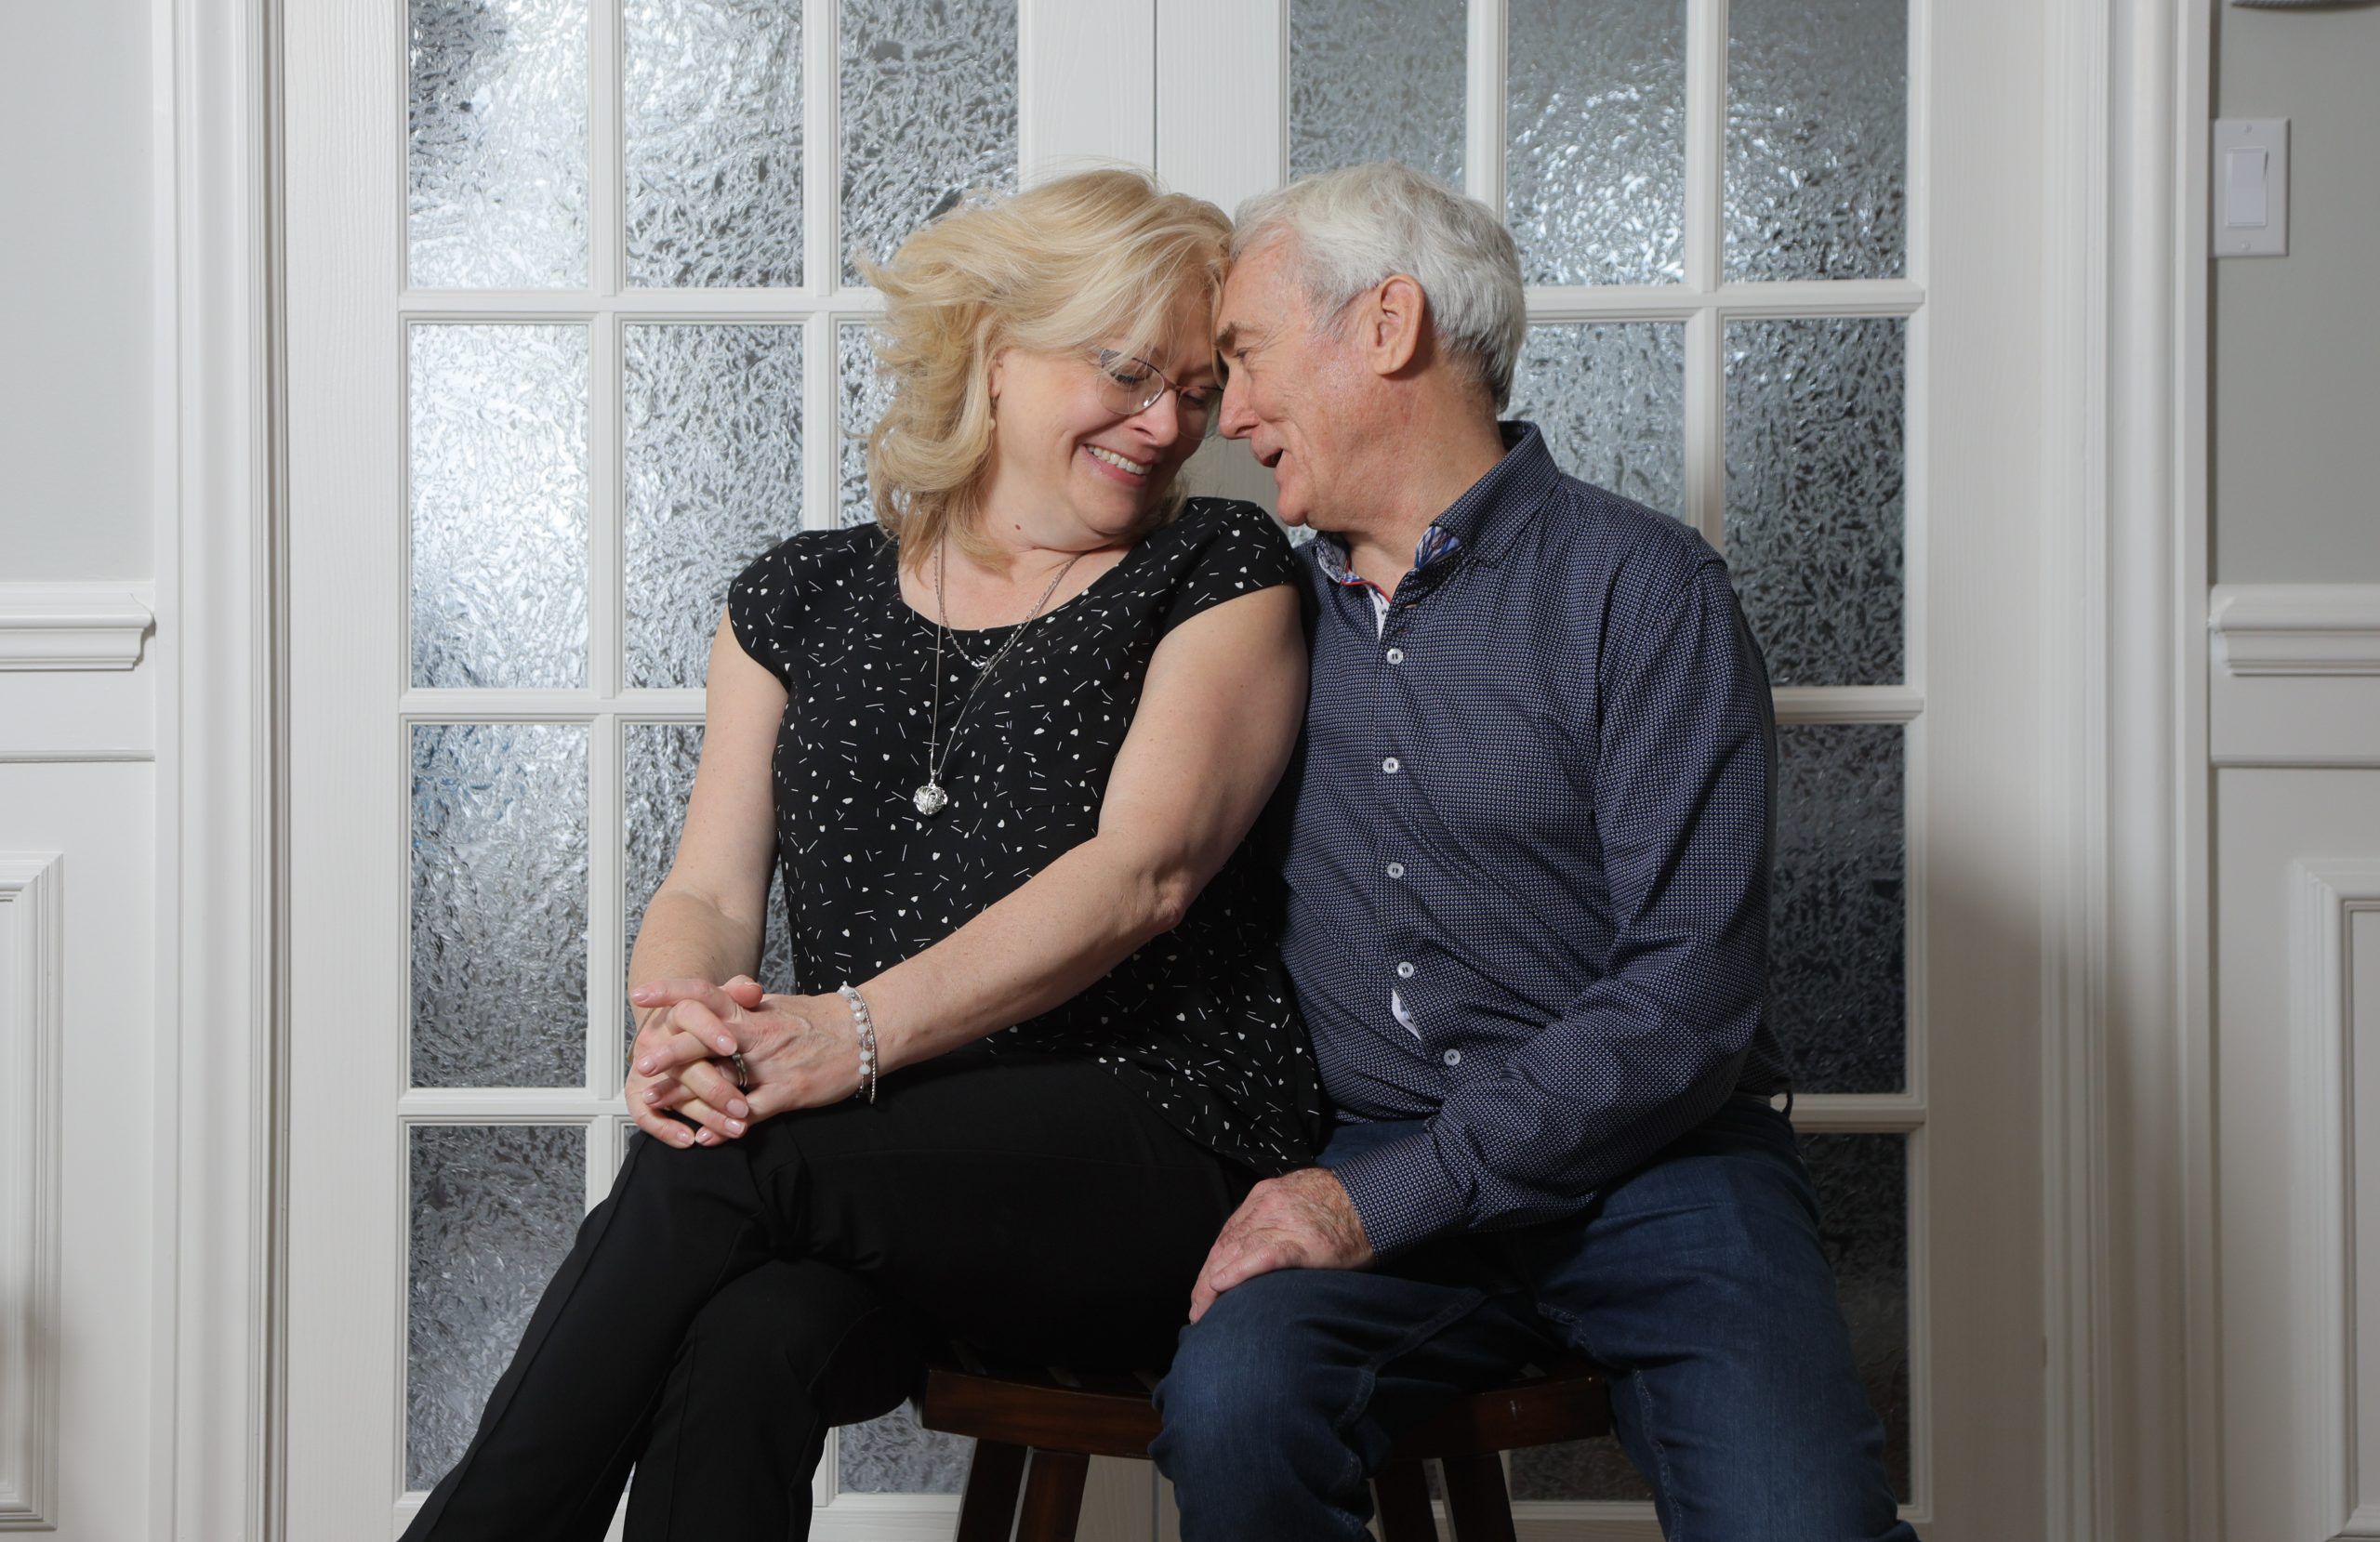 Linda Morse had been married to the love of her life, Roger Francoeur, for only five years when she received a devastating diagnosis. Photo: Christinne Muschi